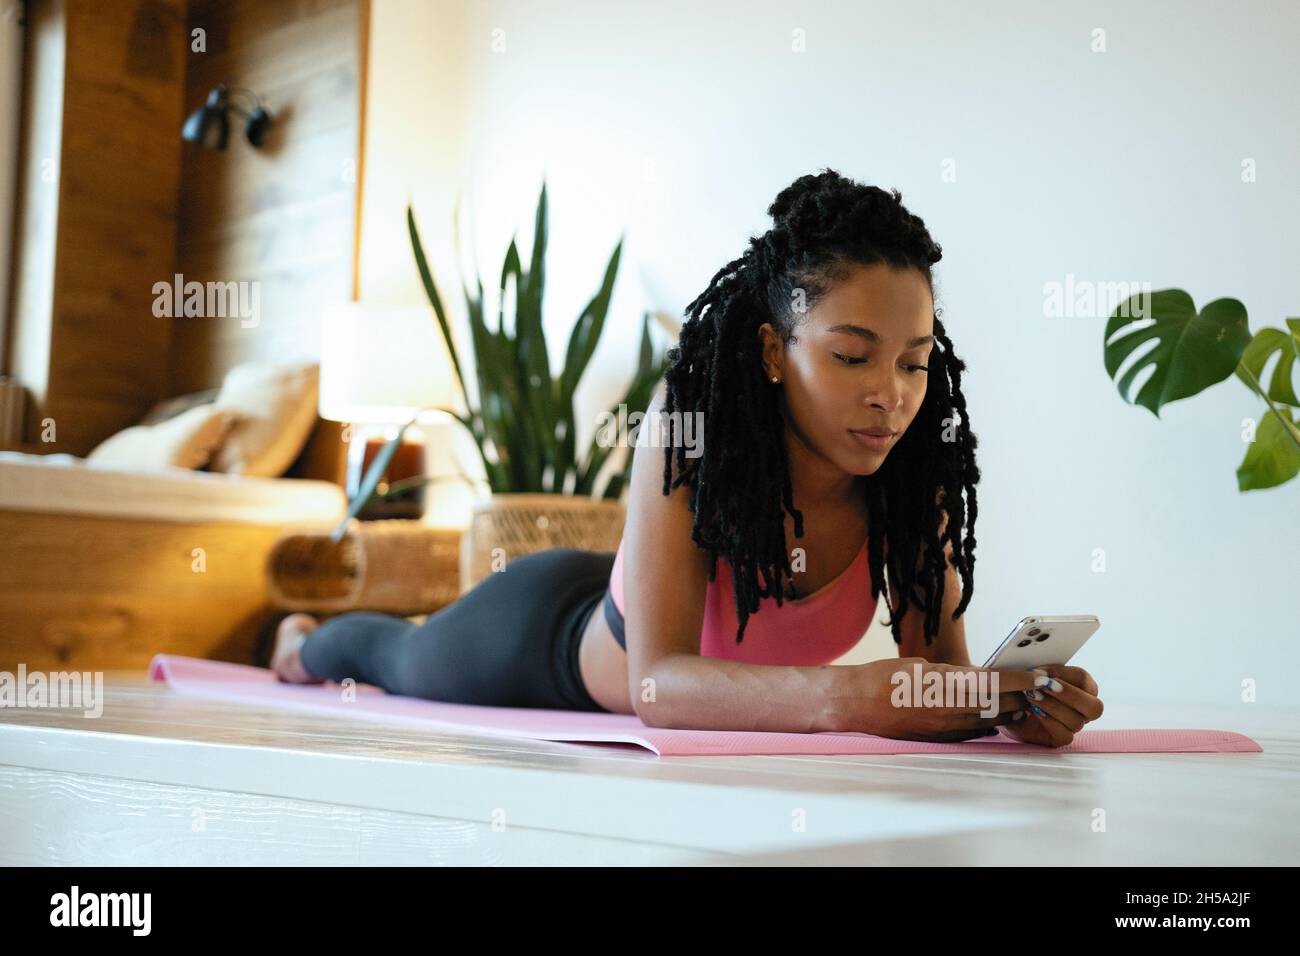 Young sporty woman after practicing yoga, break in doing exercise, relaxing on yoga mat, texting on smartphone Stock Photo